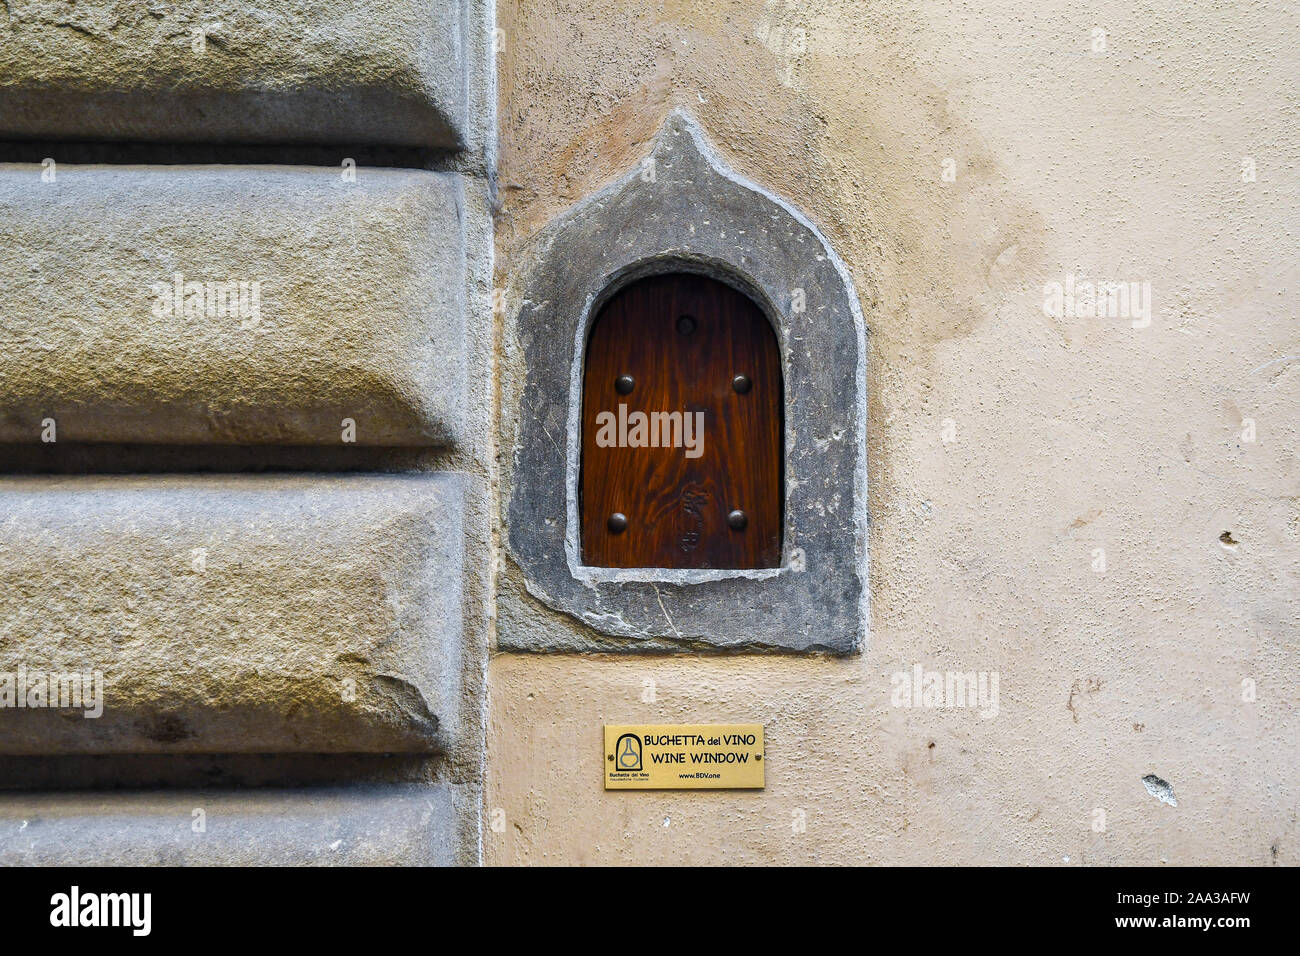 A wine window, used in the past for the sale of wine directly on the street, on the façade of Palazzo Mellini Fossi, Florence, Tuscany, Italy Stock Photo